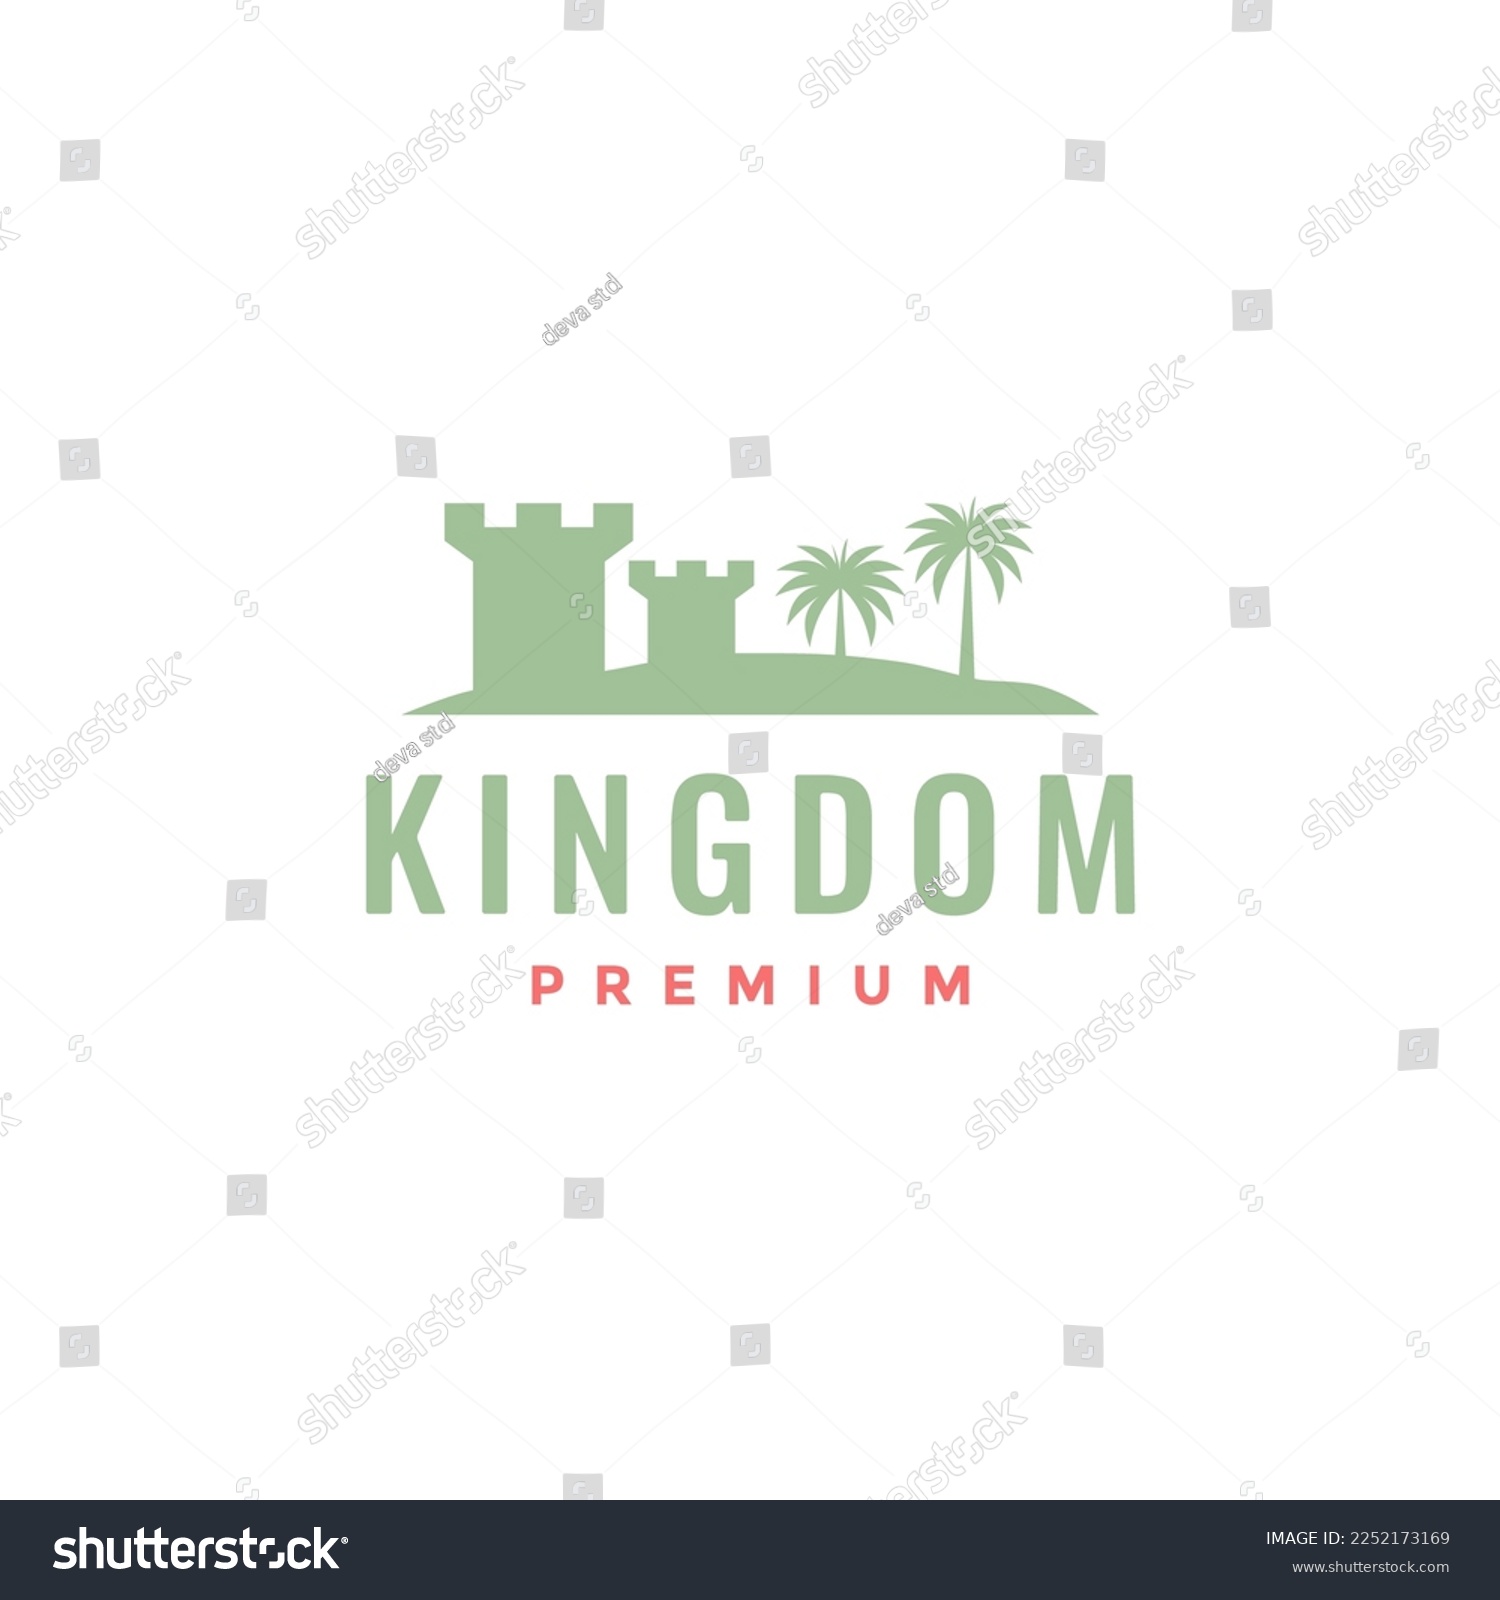 SVG of gate monument castle kingdom with palm tree logo design vector icon illustration template svg